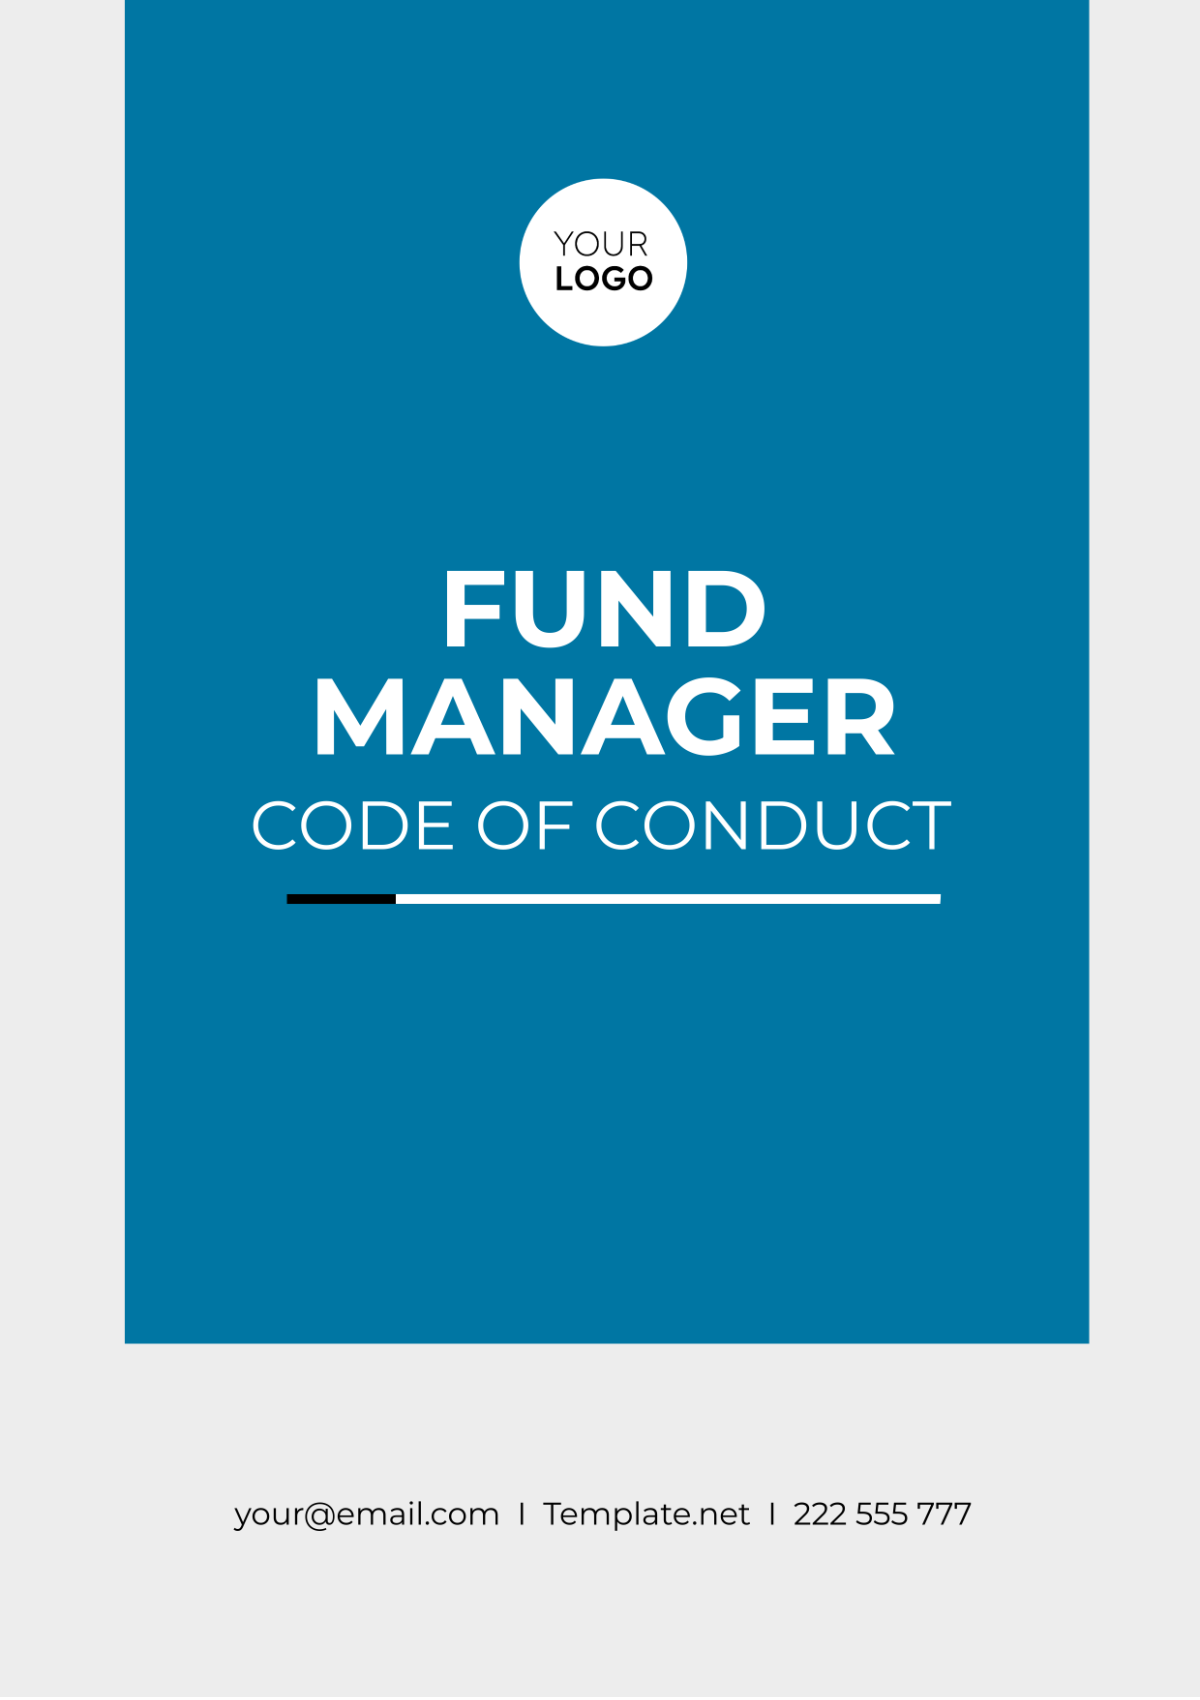 Fund Manager Code of Conduct Template